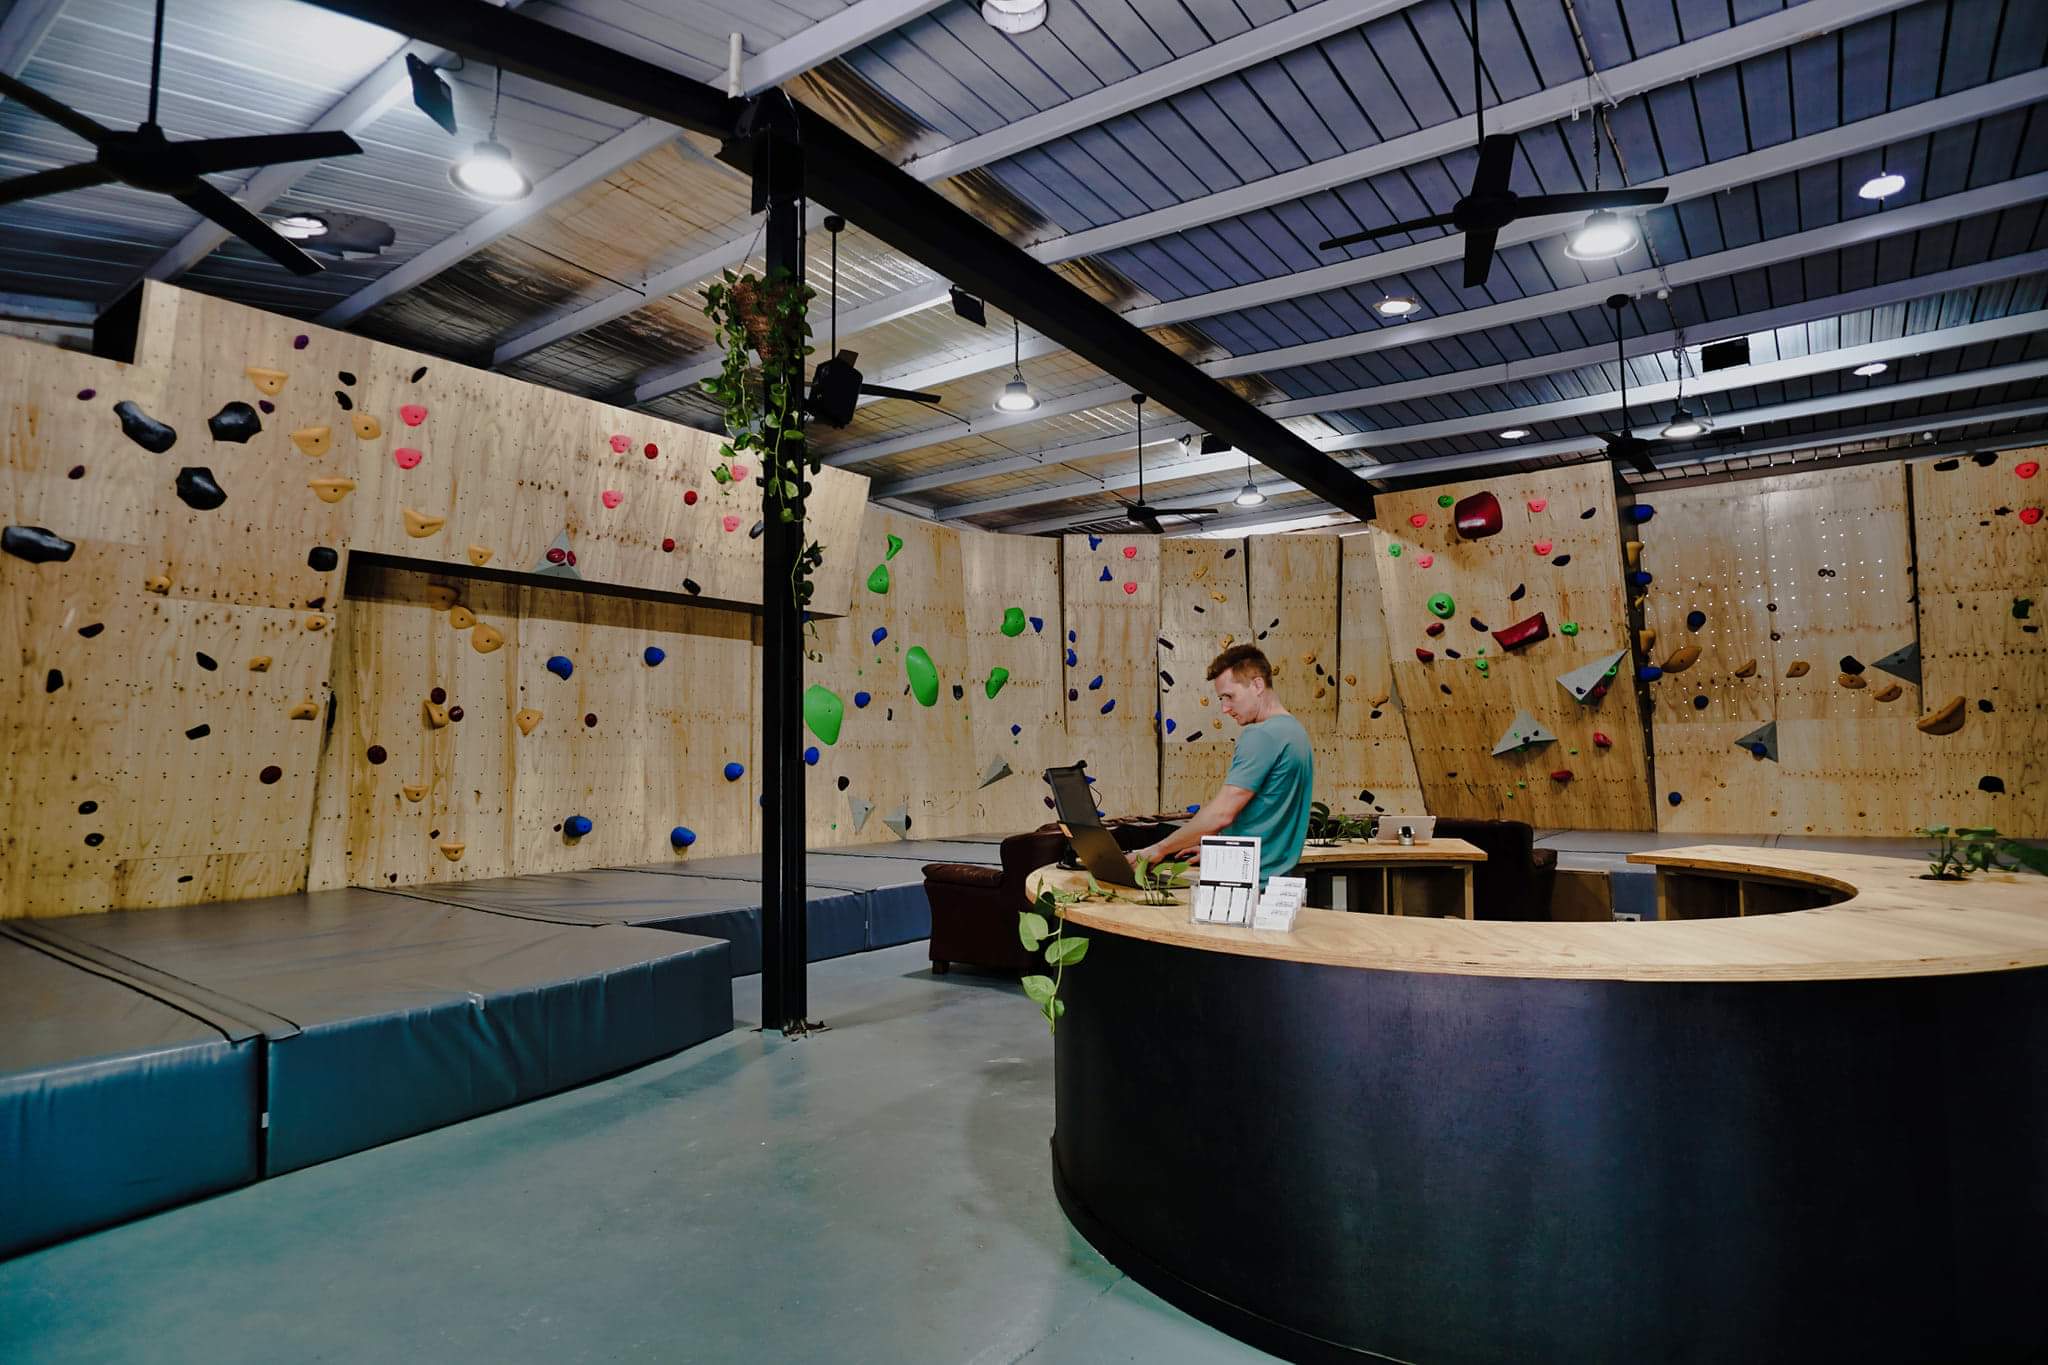 Indoor bouldering/rock climbing gym acquisition opportunity